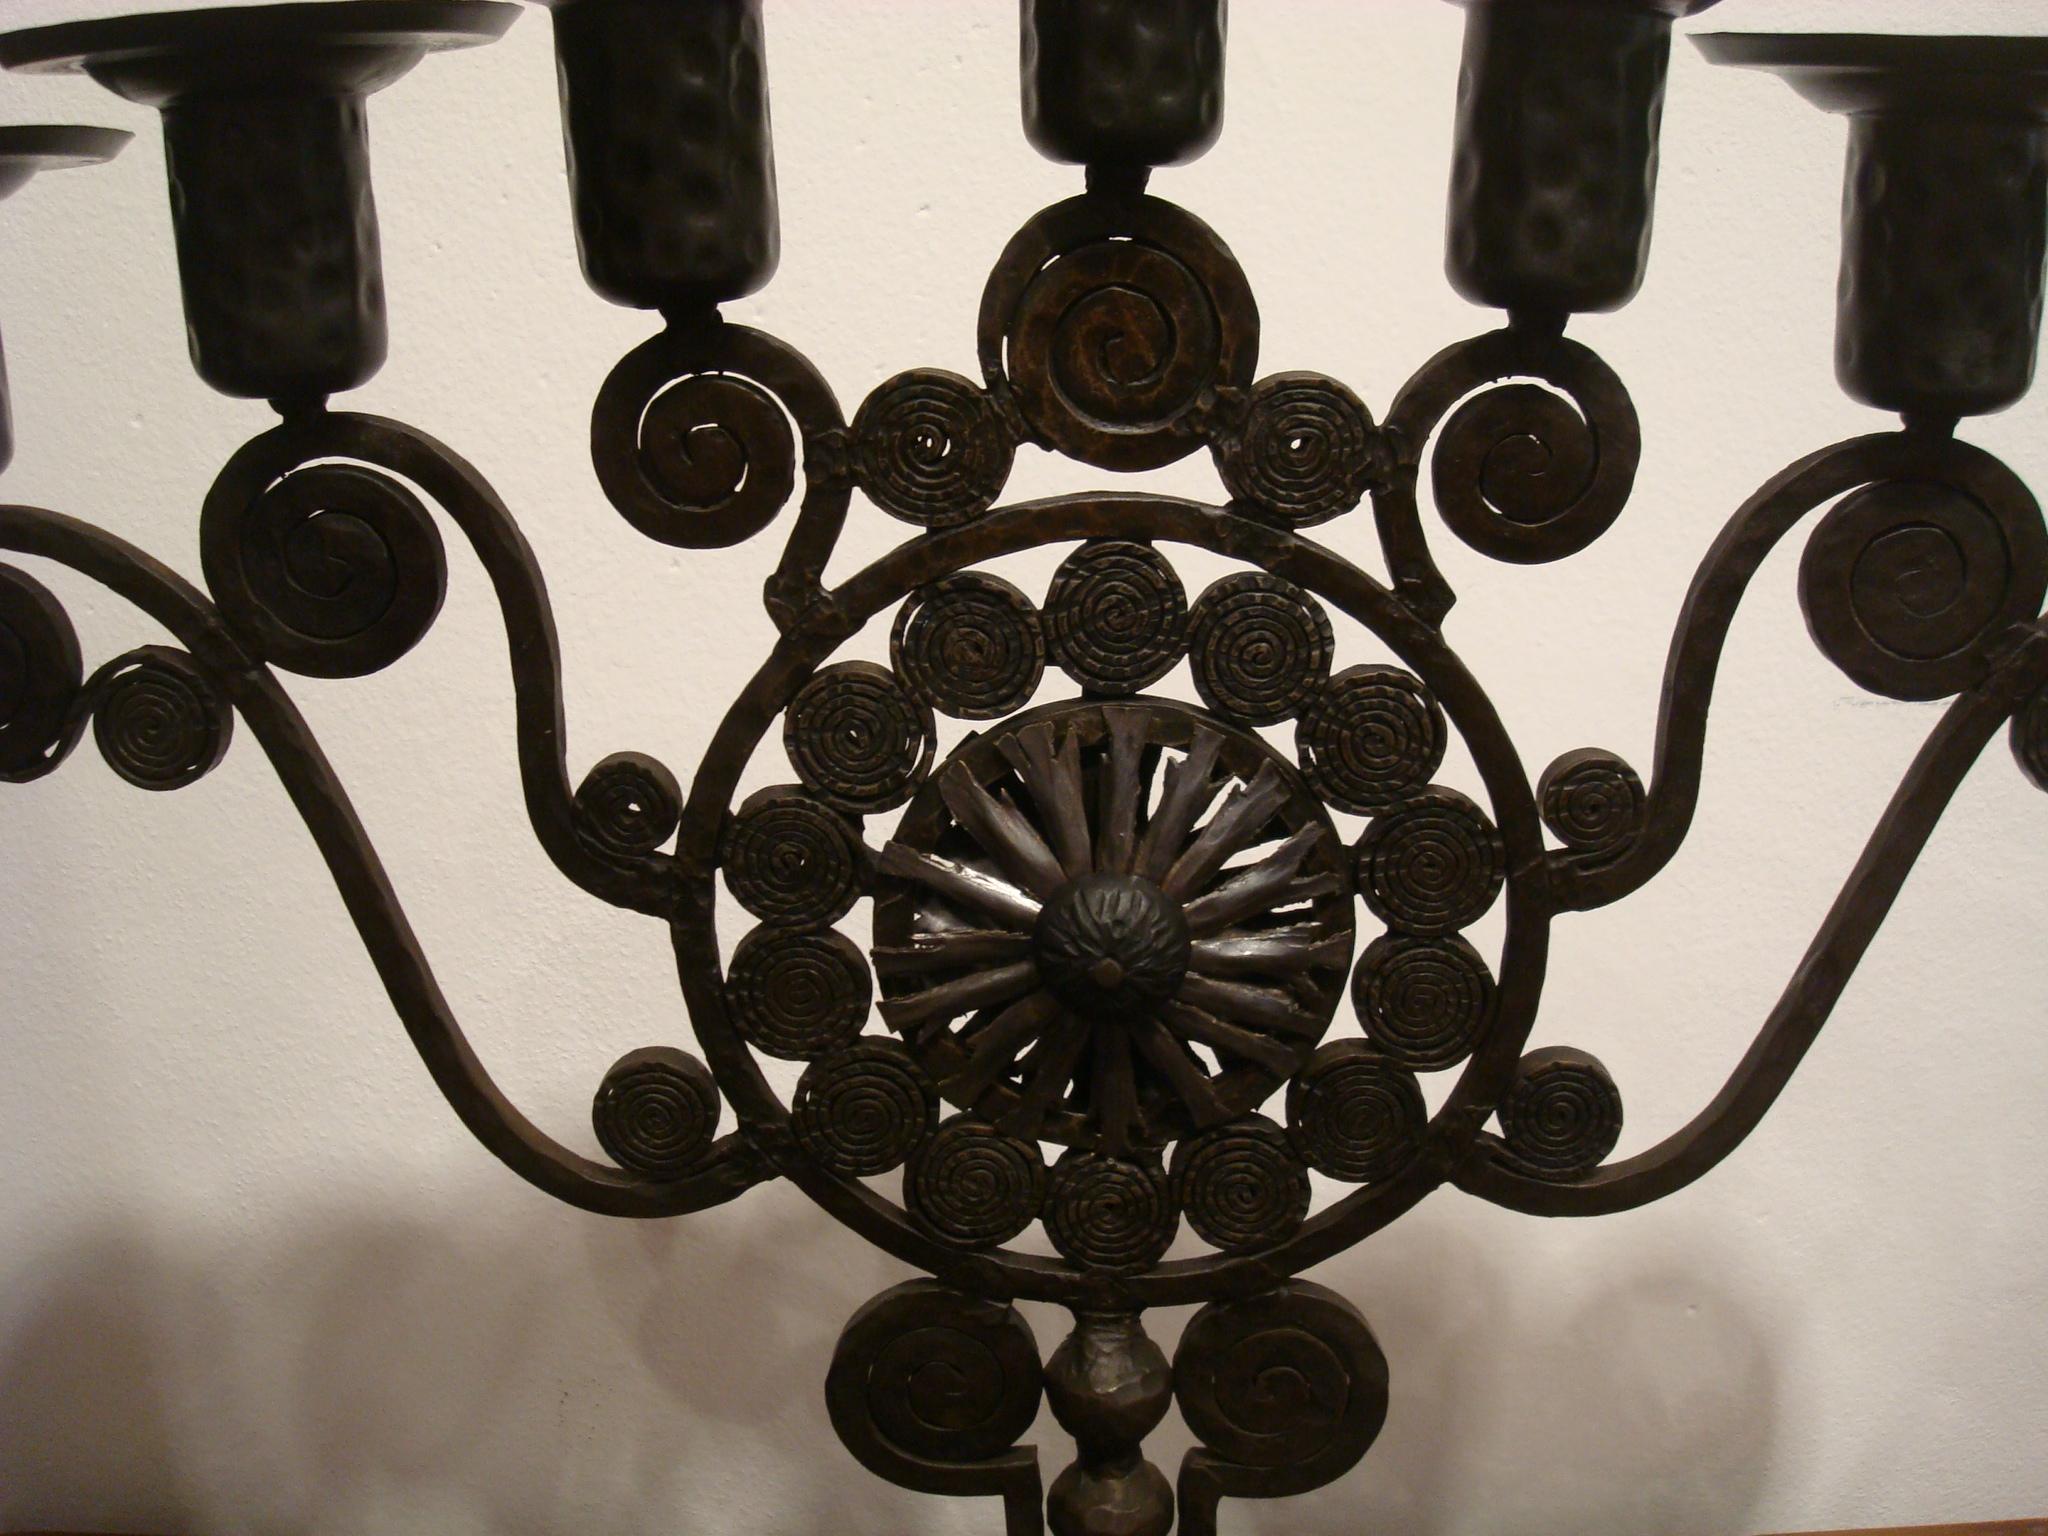 Art Deco / Secessionist period Menorah in hammered iron, with scrollwork and stylized spiral decoration, on a circular foot.
In the manner of Edgar Brandt hammered candelabra.